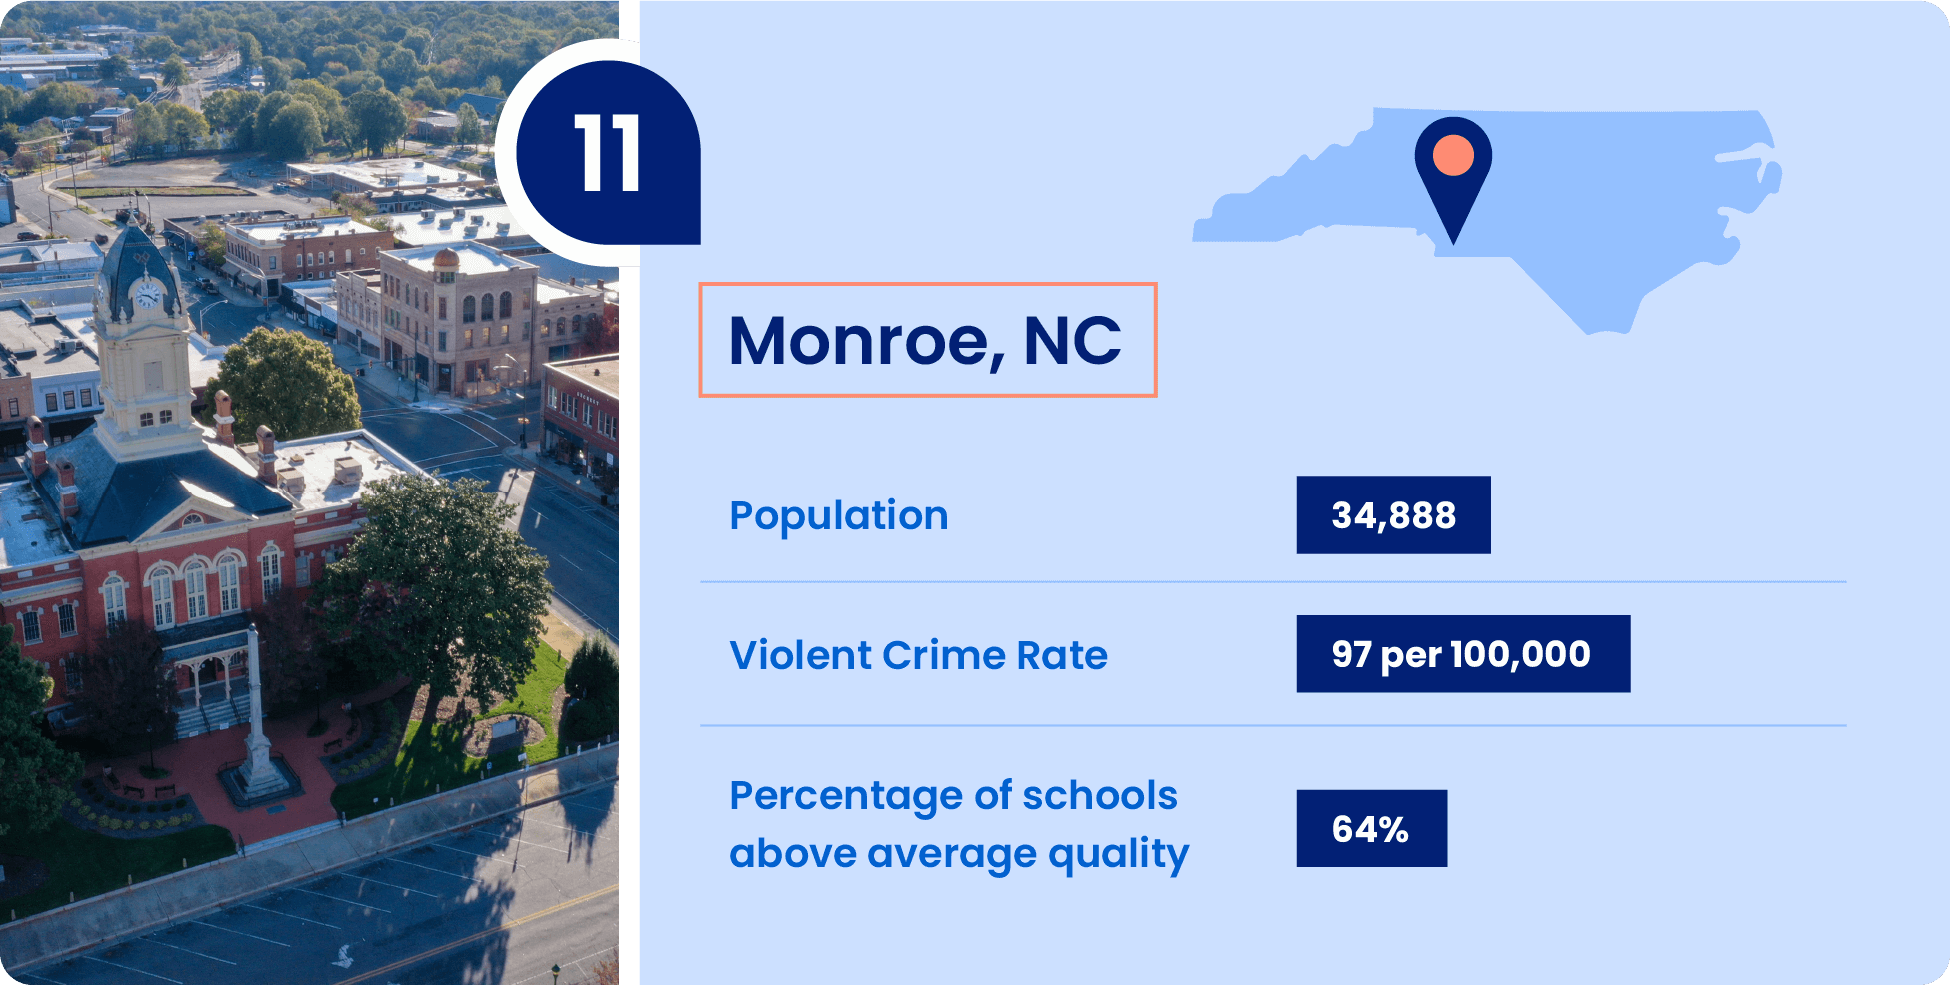 Image shows key information that make Monroe, North Carolina a great place to raise a family.